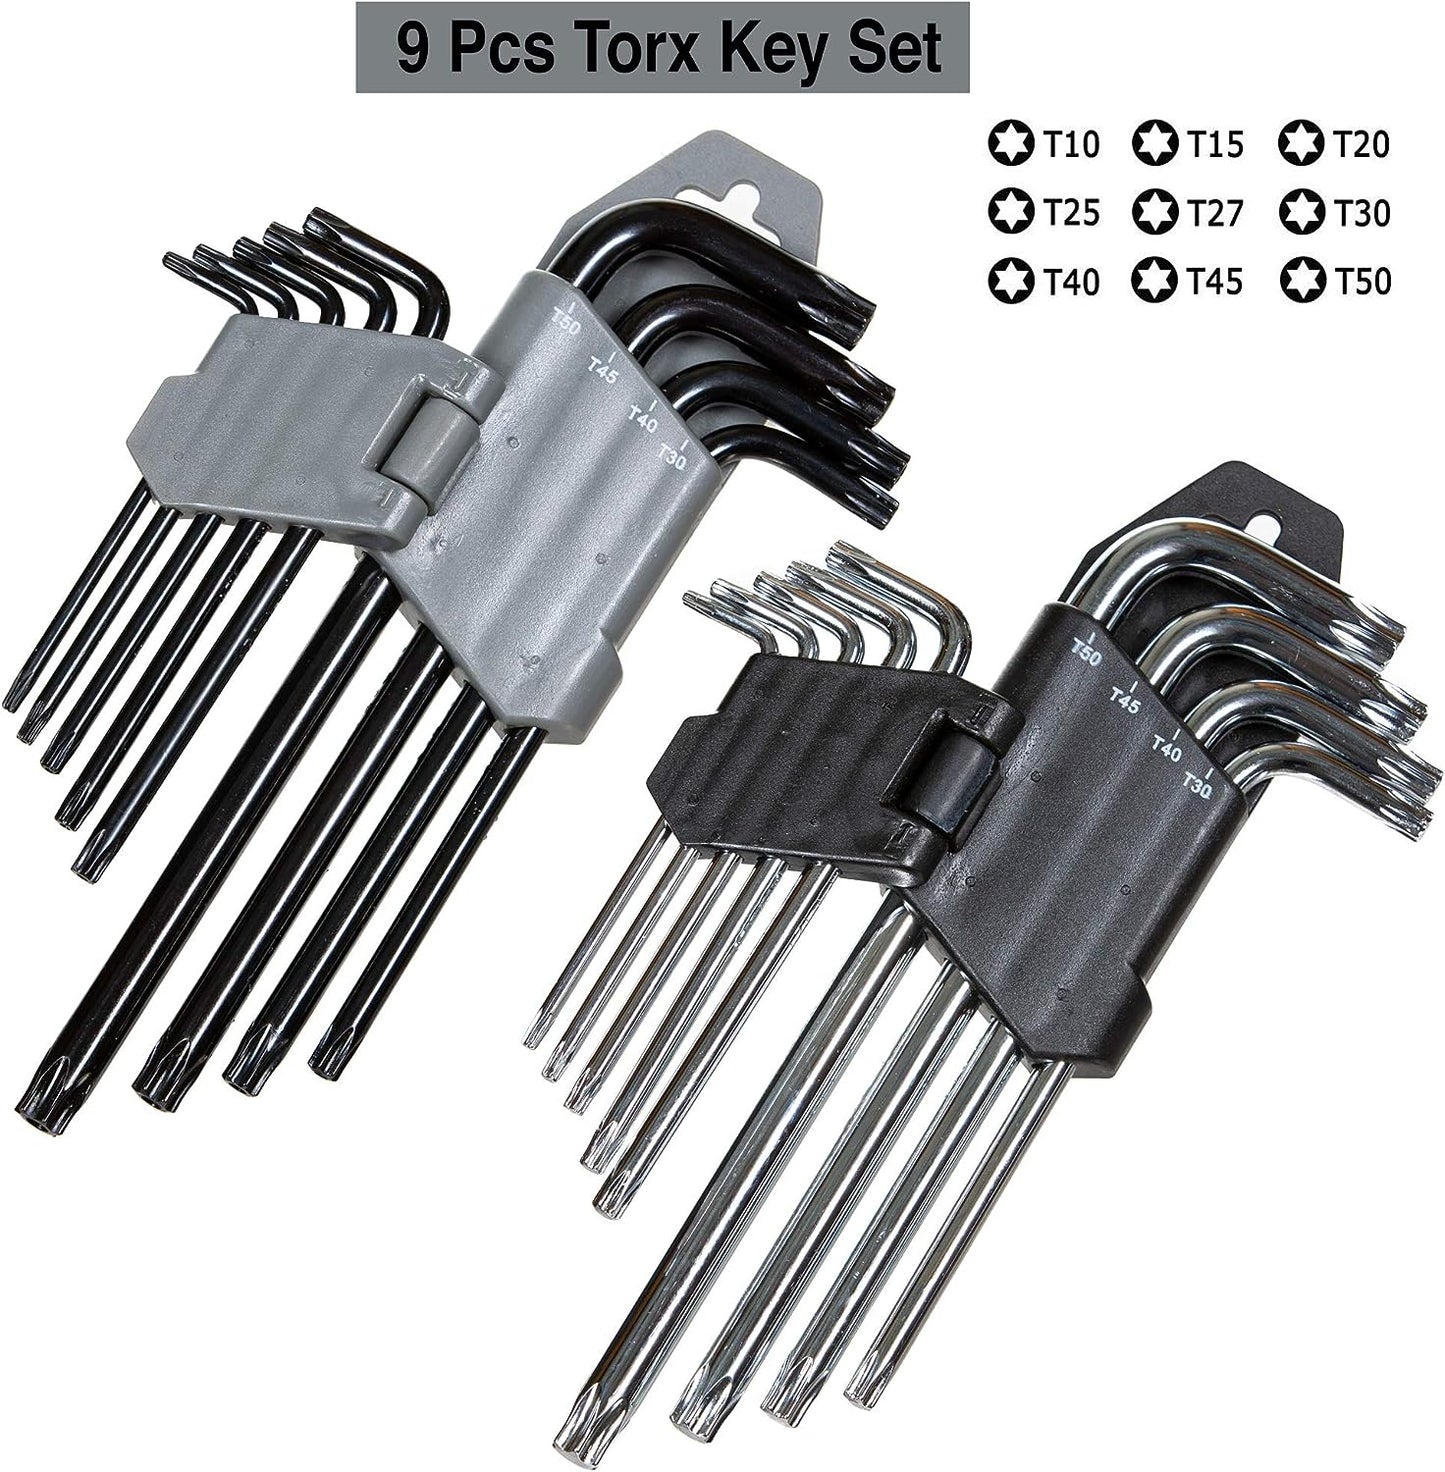 Owl Tools Torx Wrench and Security Bit Wrench Set (18 Wrenches) 9 Standard Torx Star Wrenches and 9 Security Tamper Proof Torx Wrenches